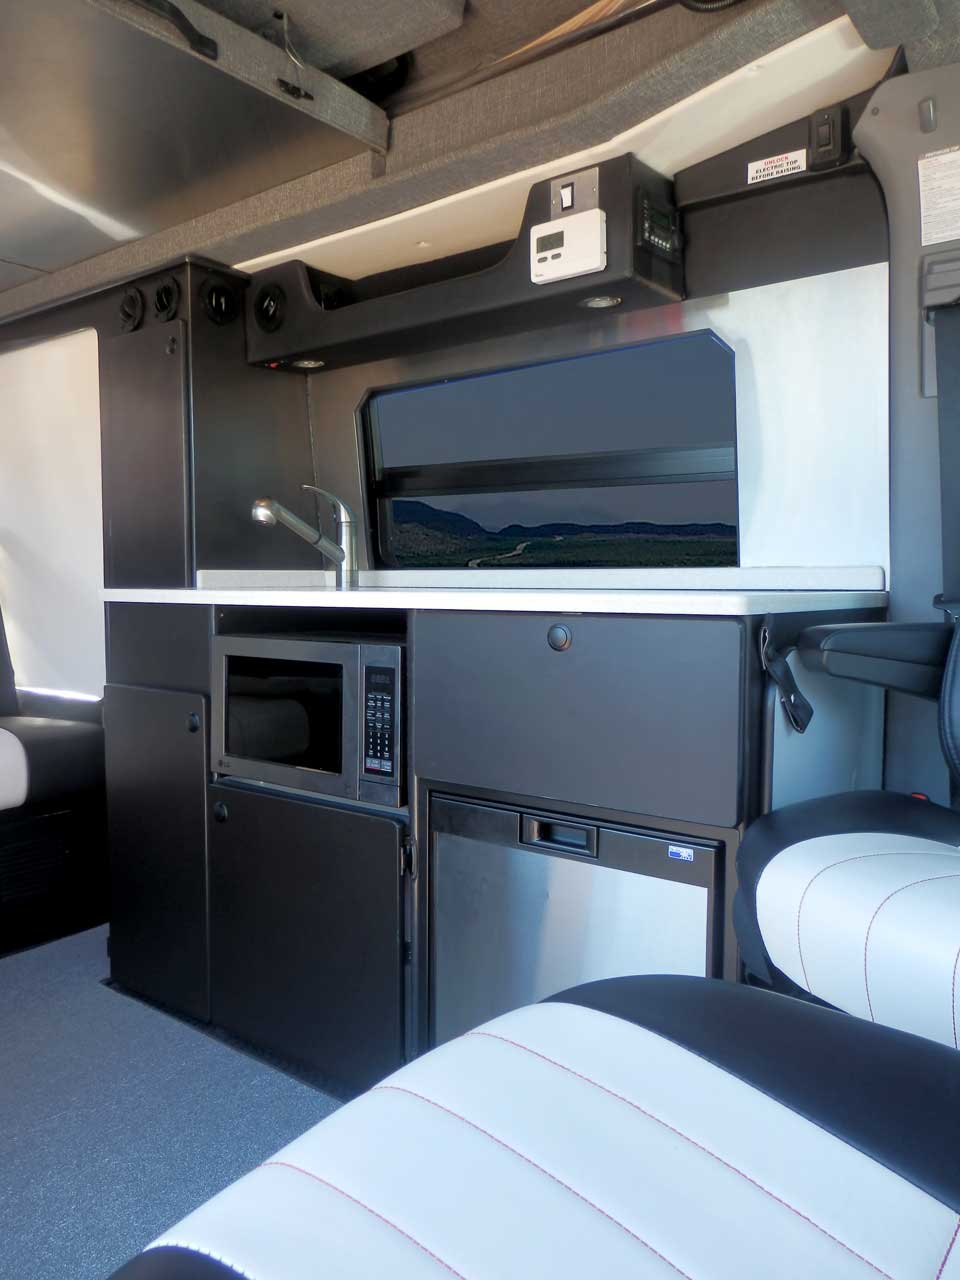 Sportsmobile camper van converison with black cabinets in the galley.